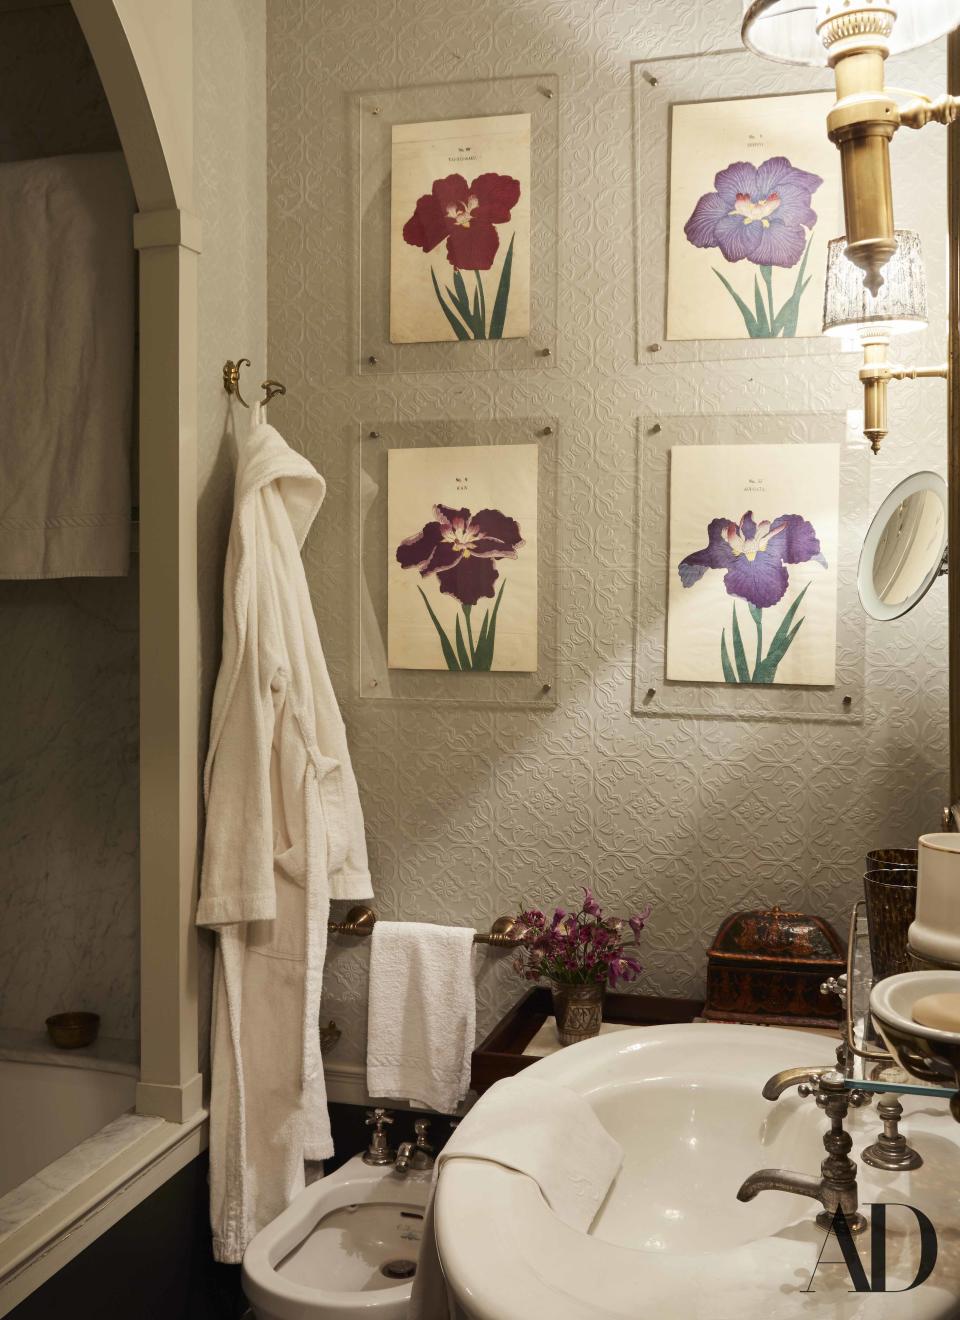 Four vintage Japanese watercolor engravings are displayed on the bathroom's embossed wallpaper; sconces by Studio Peregalli.